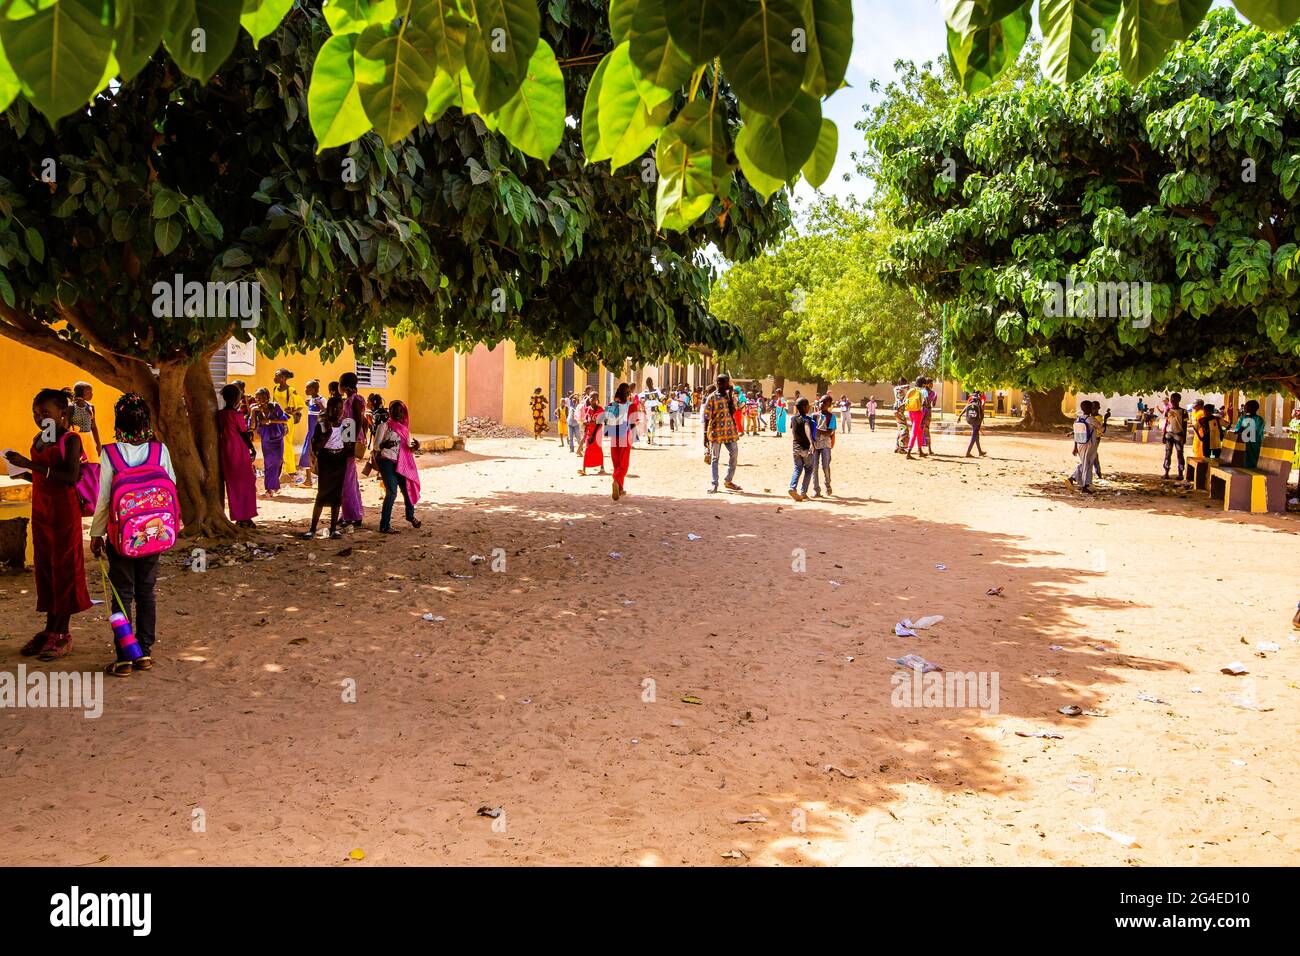 MBOUR, SENEGAL - DECEMBER Circa, 2020. Unidentified young African school children walking in the playground at end of classroom. With colorful clothes Stock Photo